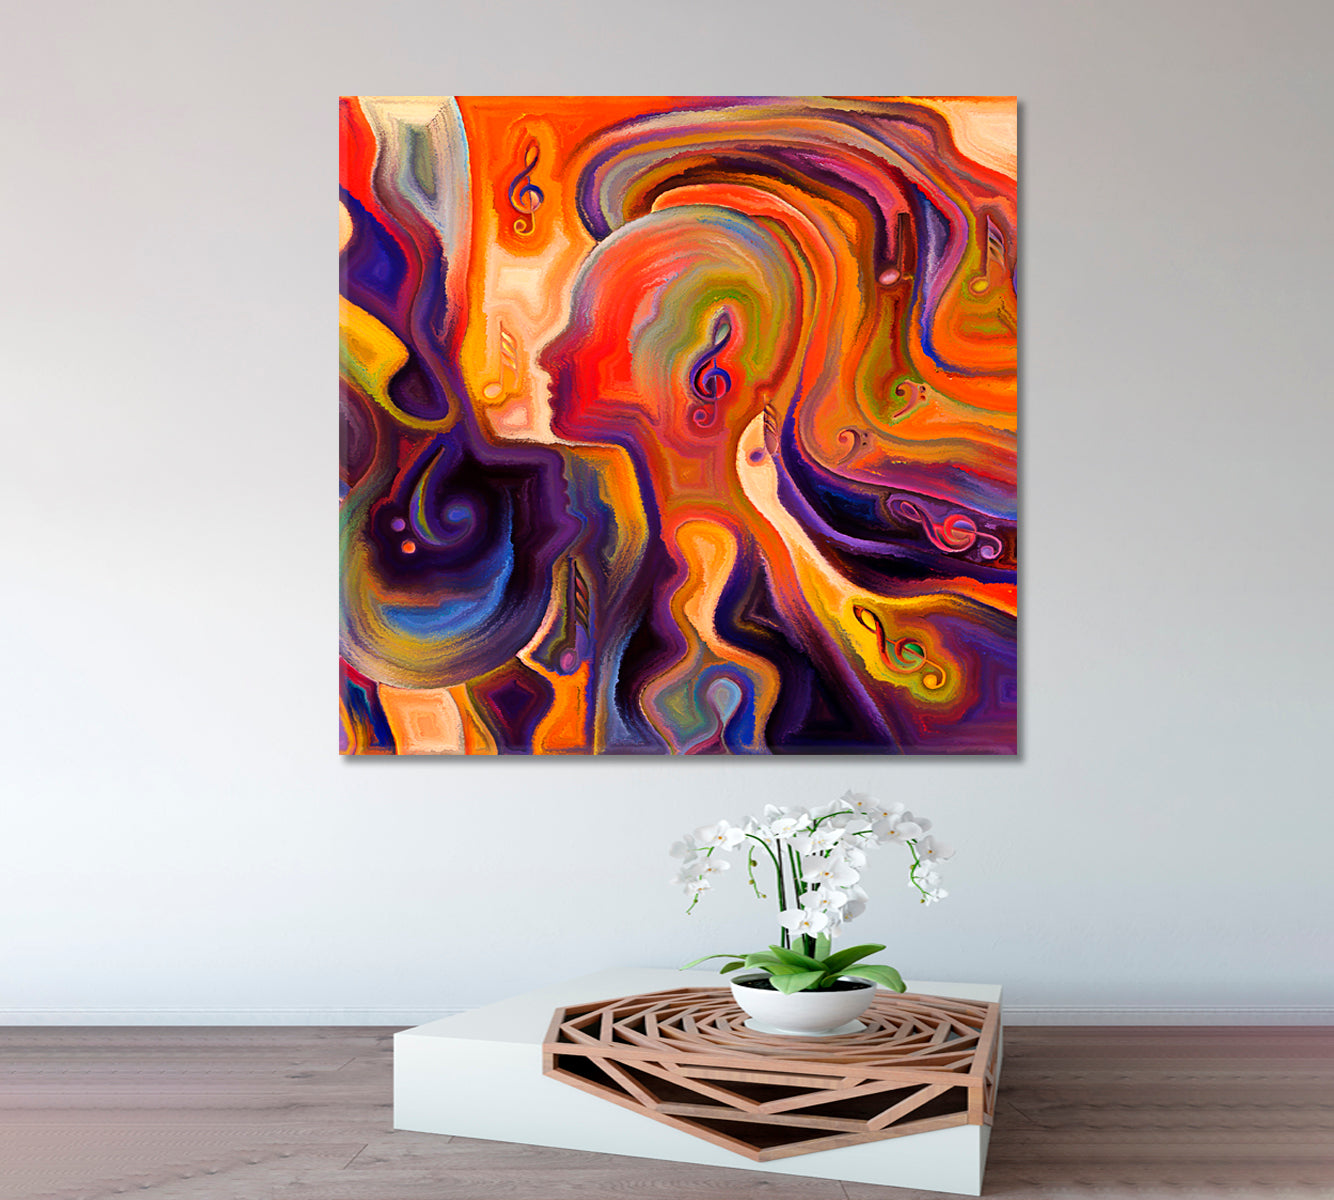 VIBRANT MODERN ART Inner Consciousness Vivid Coral and Purple - Square Panel Contemporary Art Artesty 1 Panel 12"x12" 